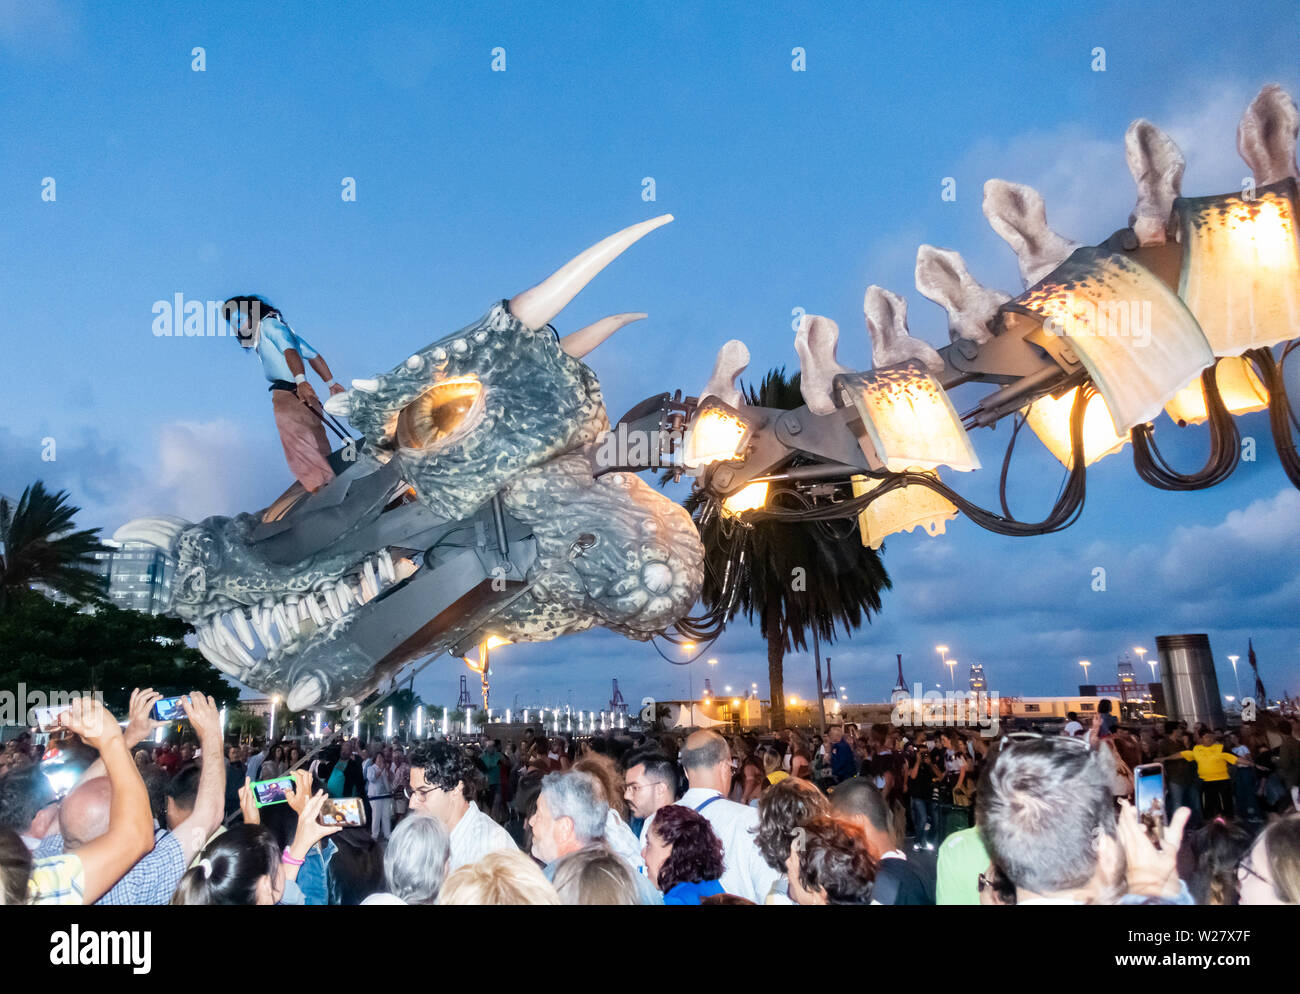 Las Palmas, Gran Canaria, Canary Islands, Spain. 6th July 2019. 'Dragonautes', a huge Dragon, the creation of French theatre group, Planete Vapeur, takes to the streets of Las Palmas as the 2019 festival of theatre, music and dance (TEMUDAS) gets under way. Credit:Alan Dawson/Alamy Live News. Stock Photo